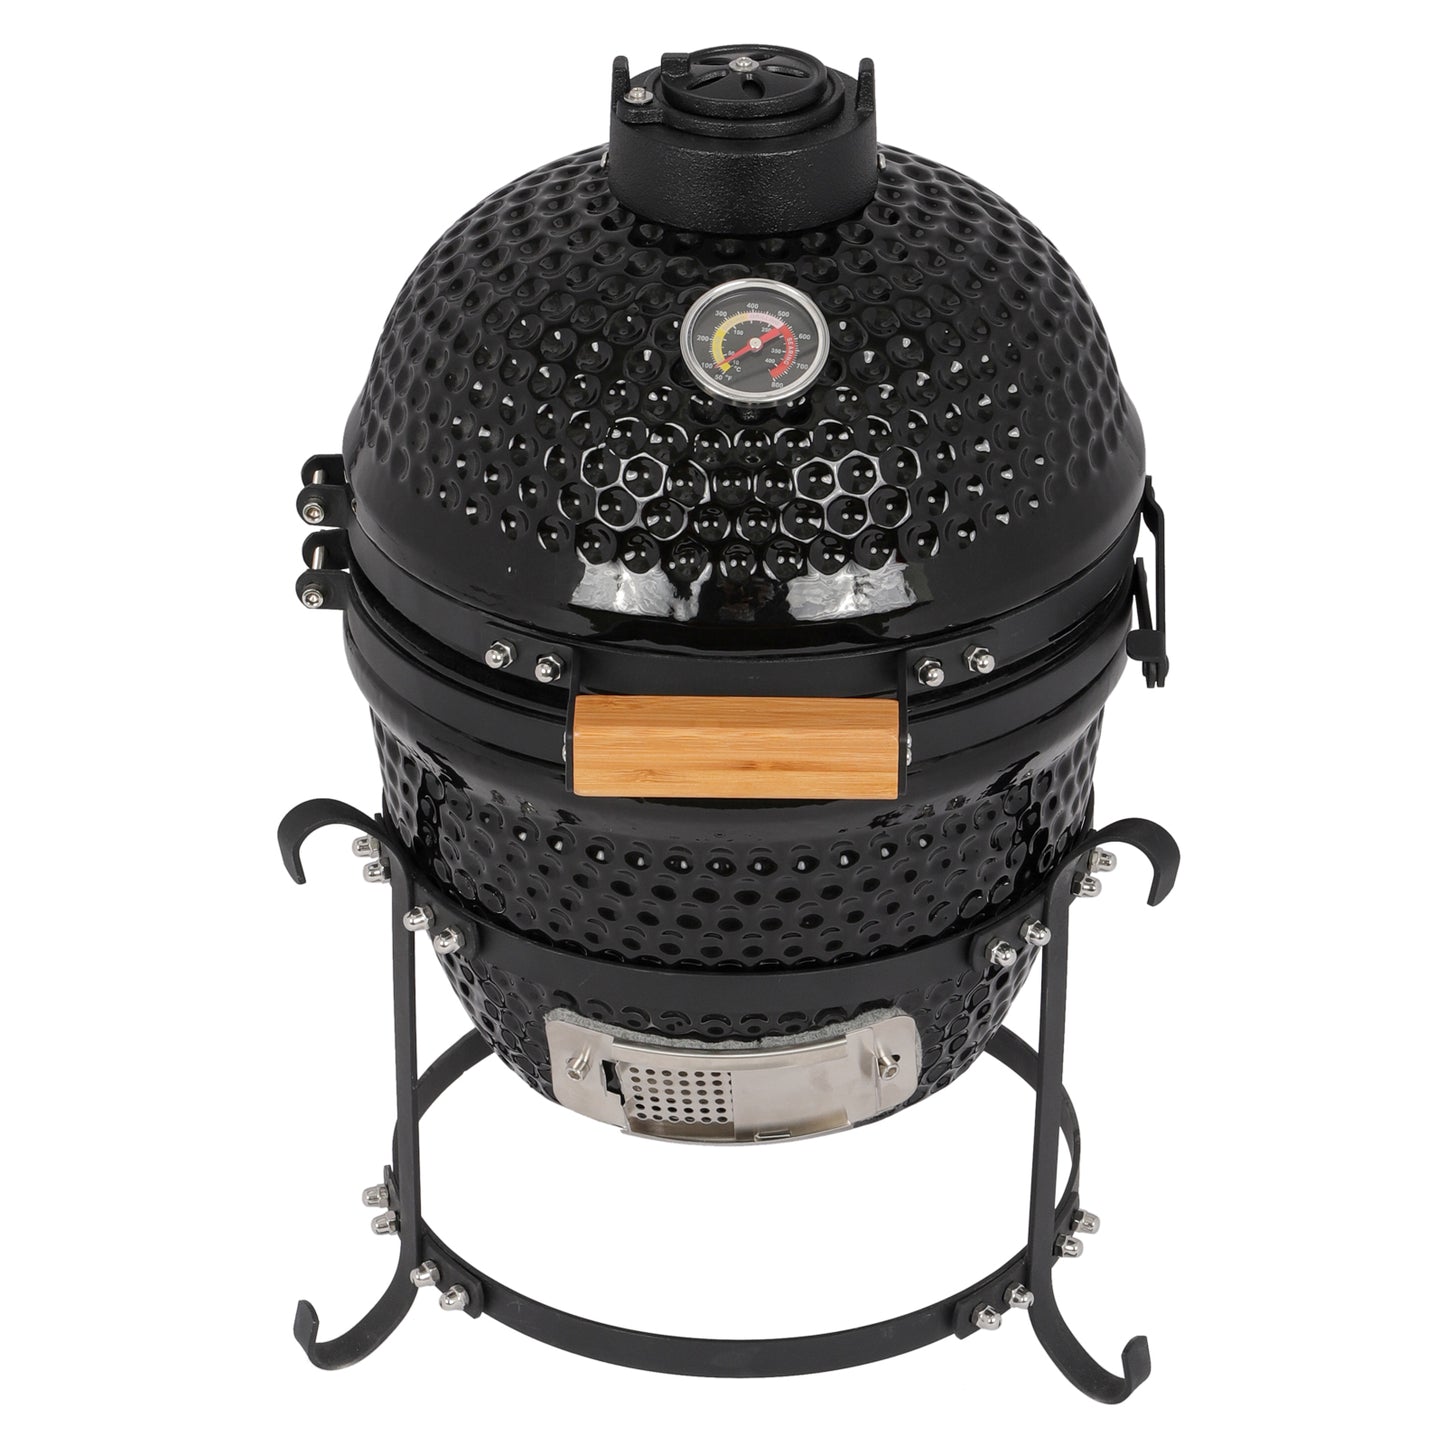 Kamado Style Egg Shaped 13in Round Ceramic Charcoal Grill - BLACK